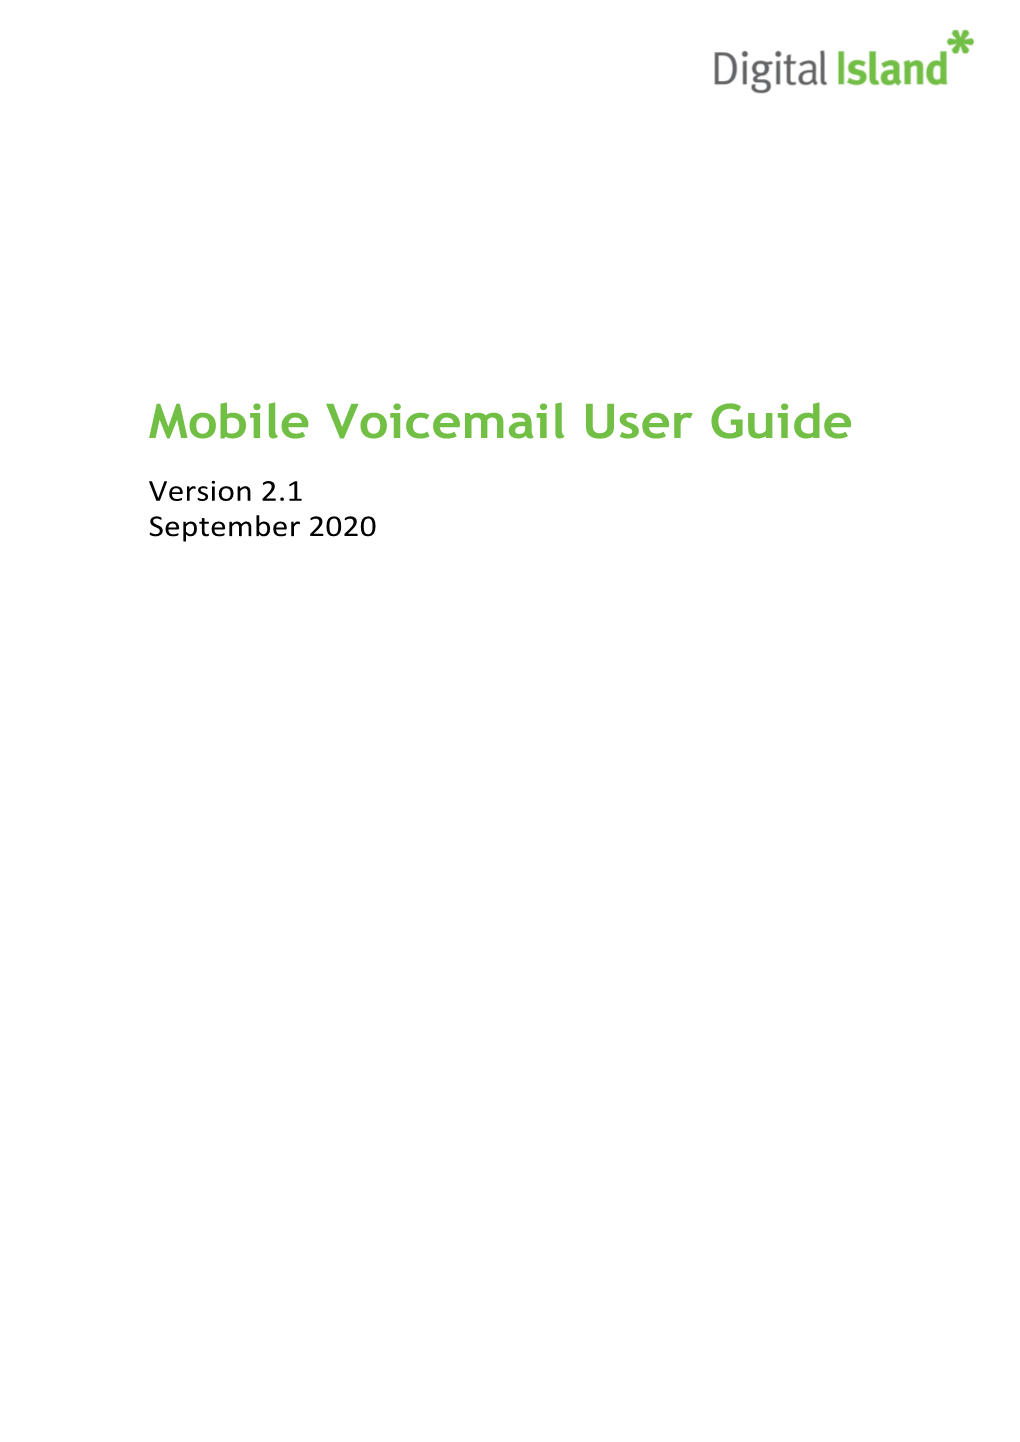 Mobile Voicemail User Guide Version 2.1 September 2020